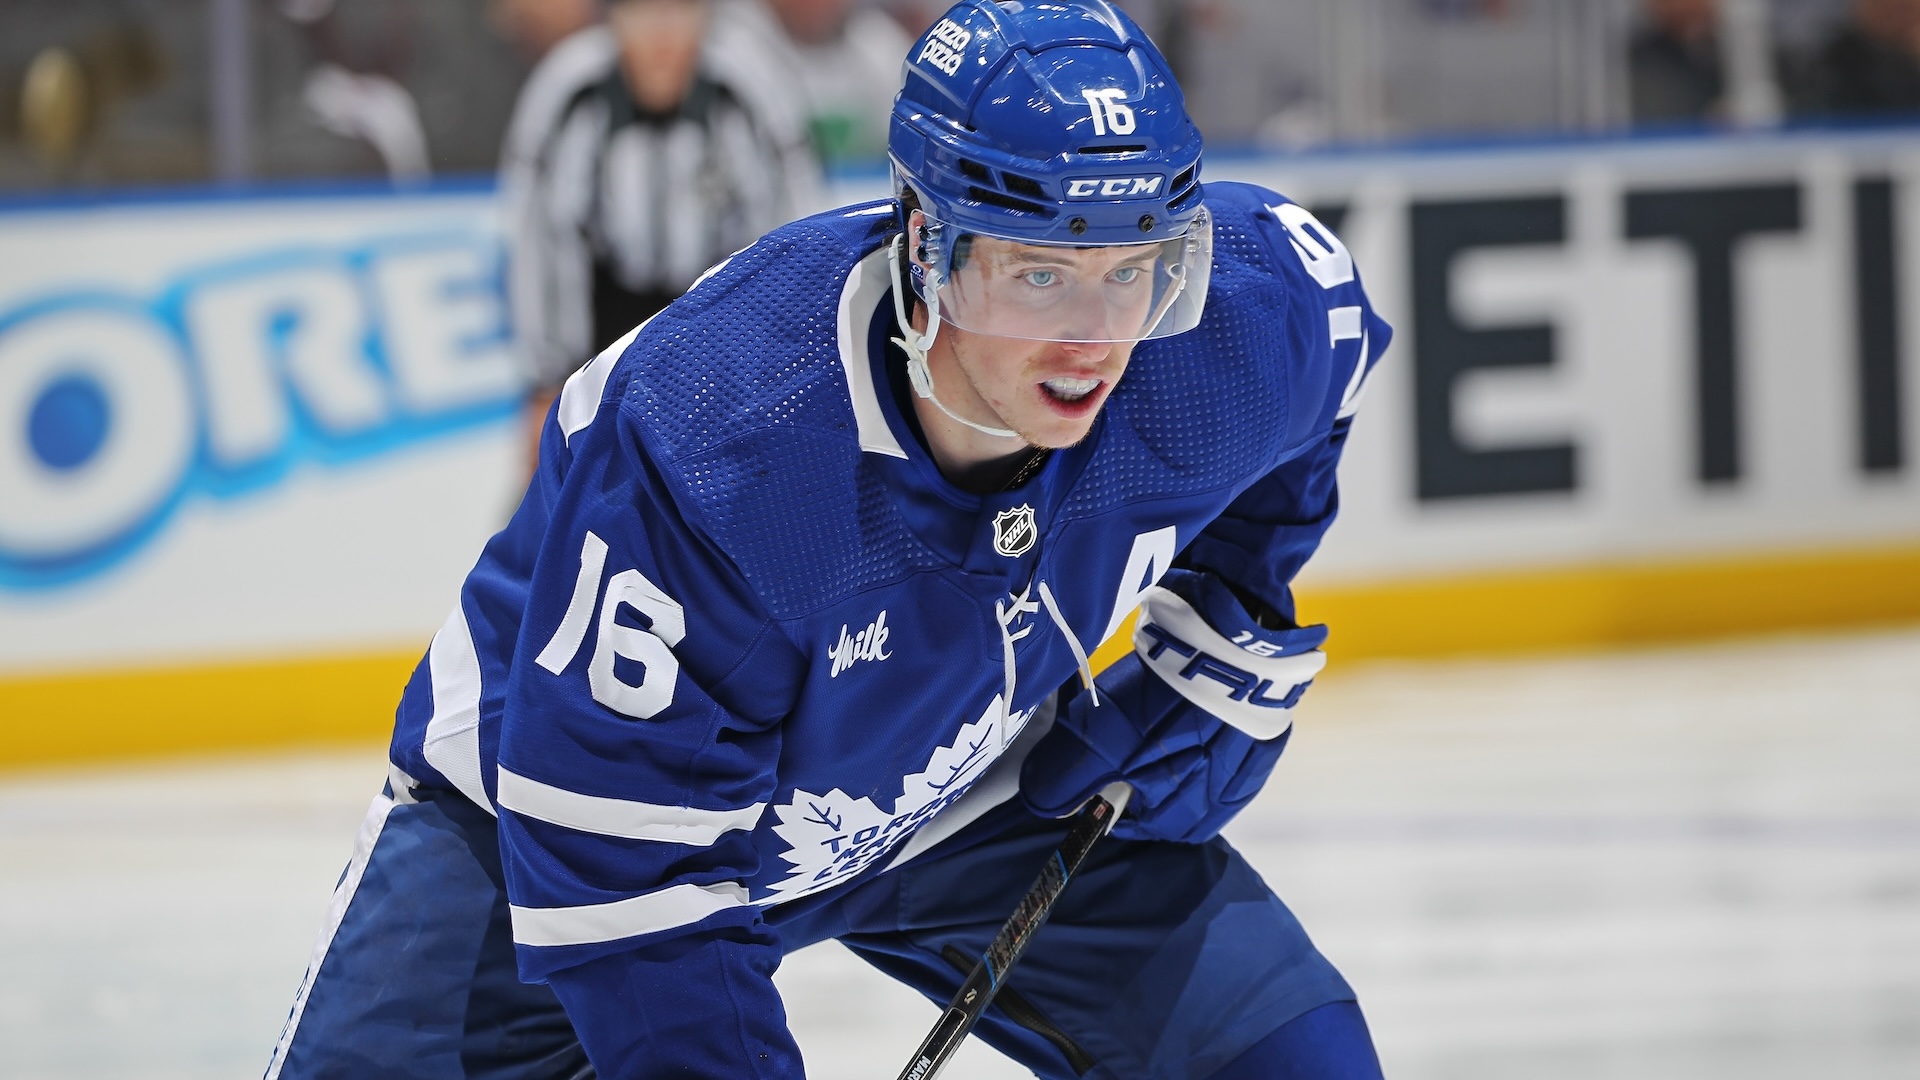 “People see us as Gods”: Marner missed an opportunity to keep his mouth shut thumbnail